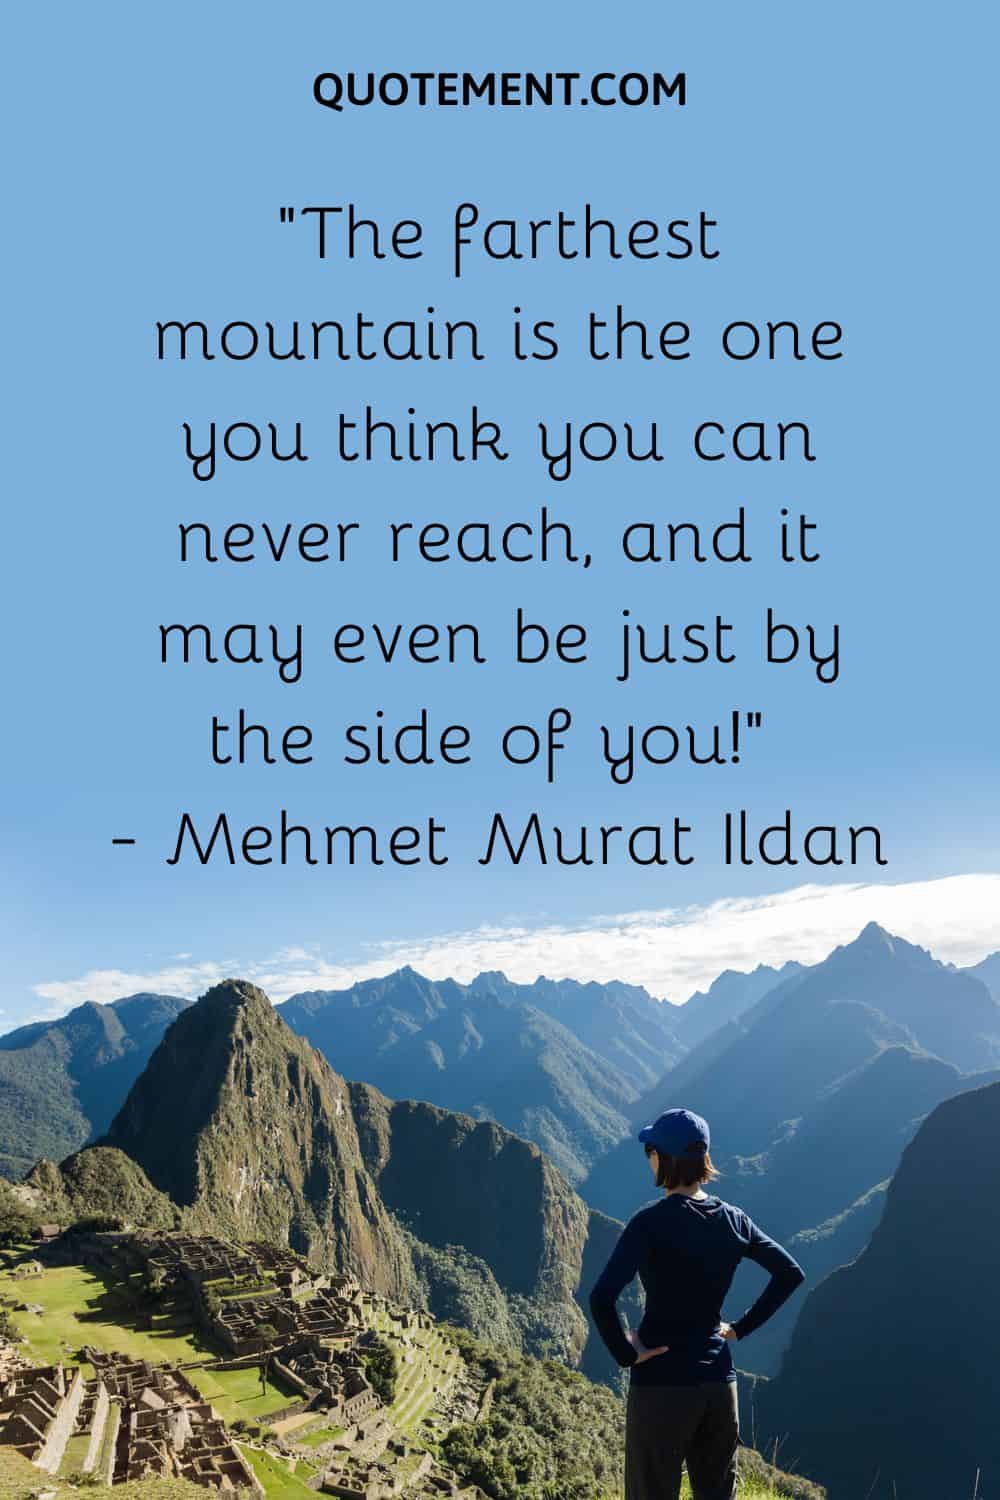 “The farthest mountain is the one you think you can never reach, and it may even be just by the side of you!” — Mehmet Murat ildan